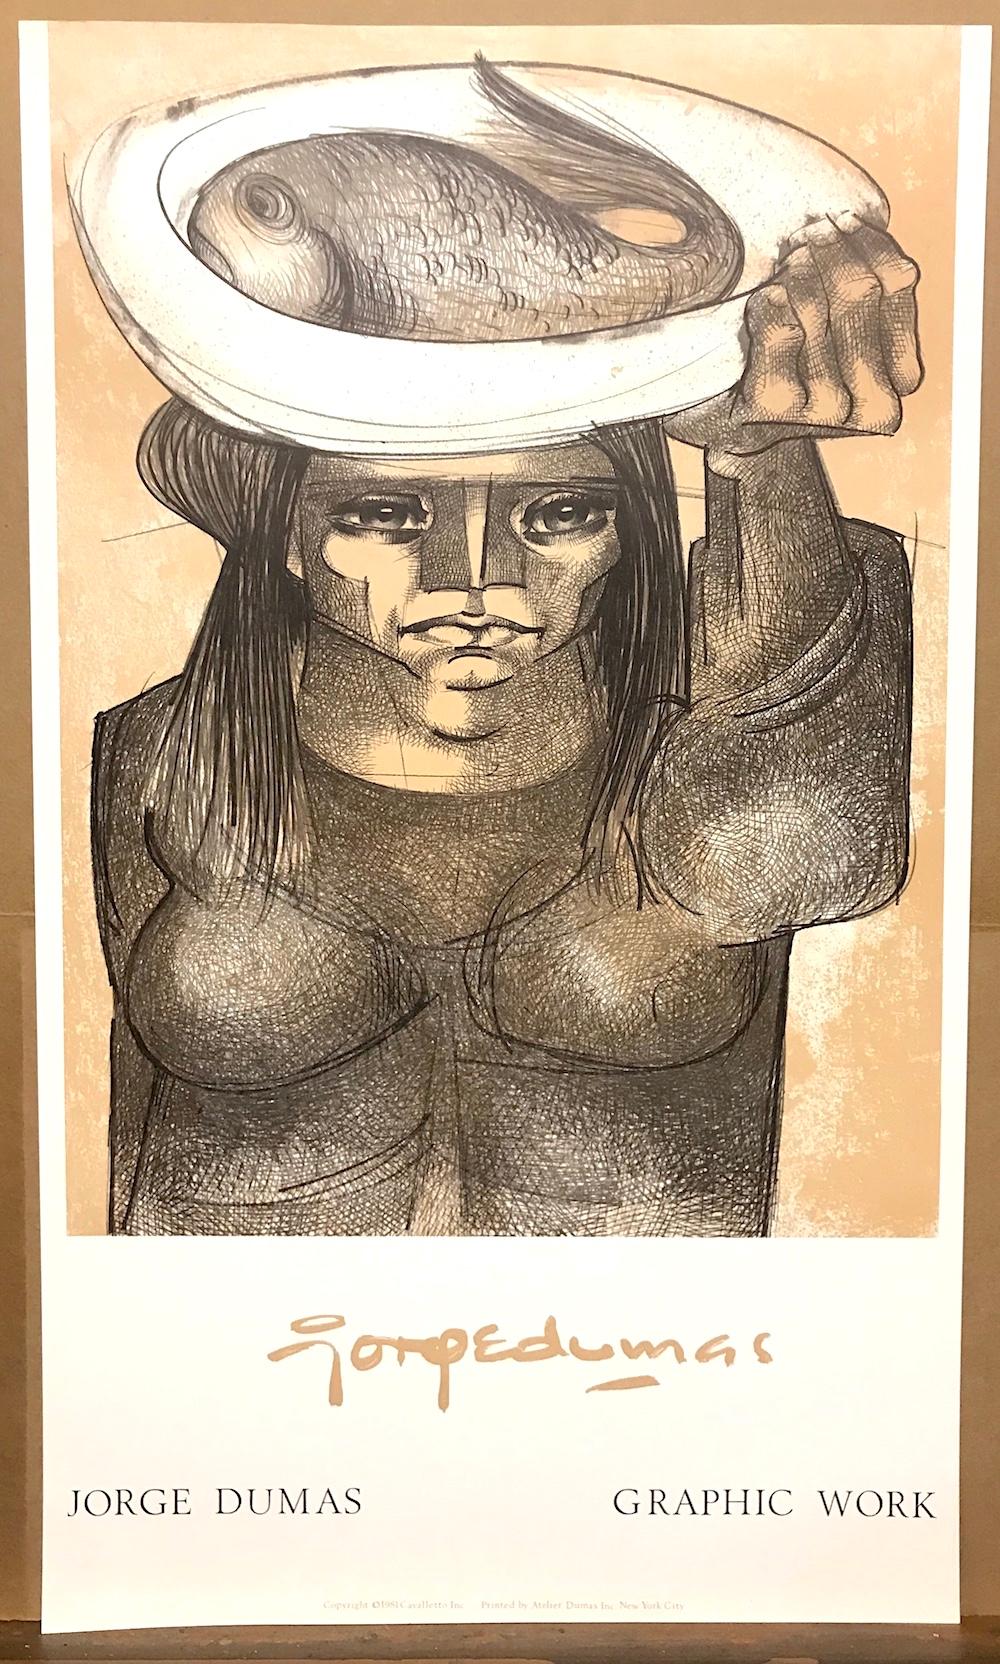 WOMAN CARRYING A FISH Lithograph Art Poster, Female Portrait, Latin American  - Cubist Print by Jorge Dumas